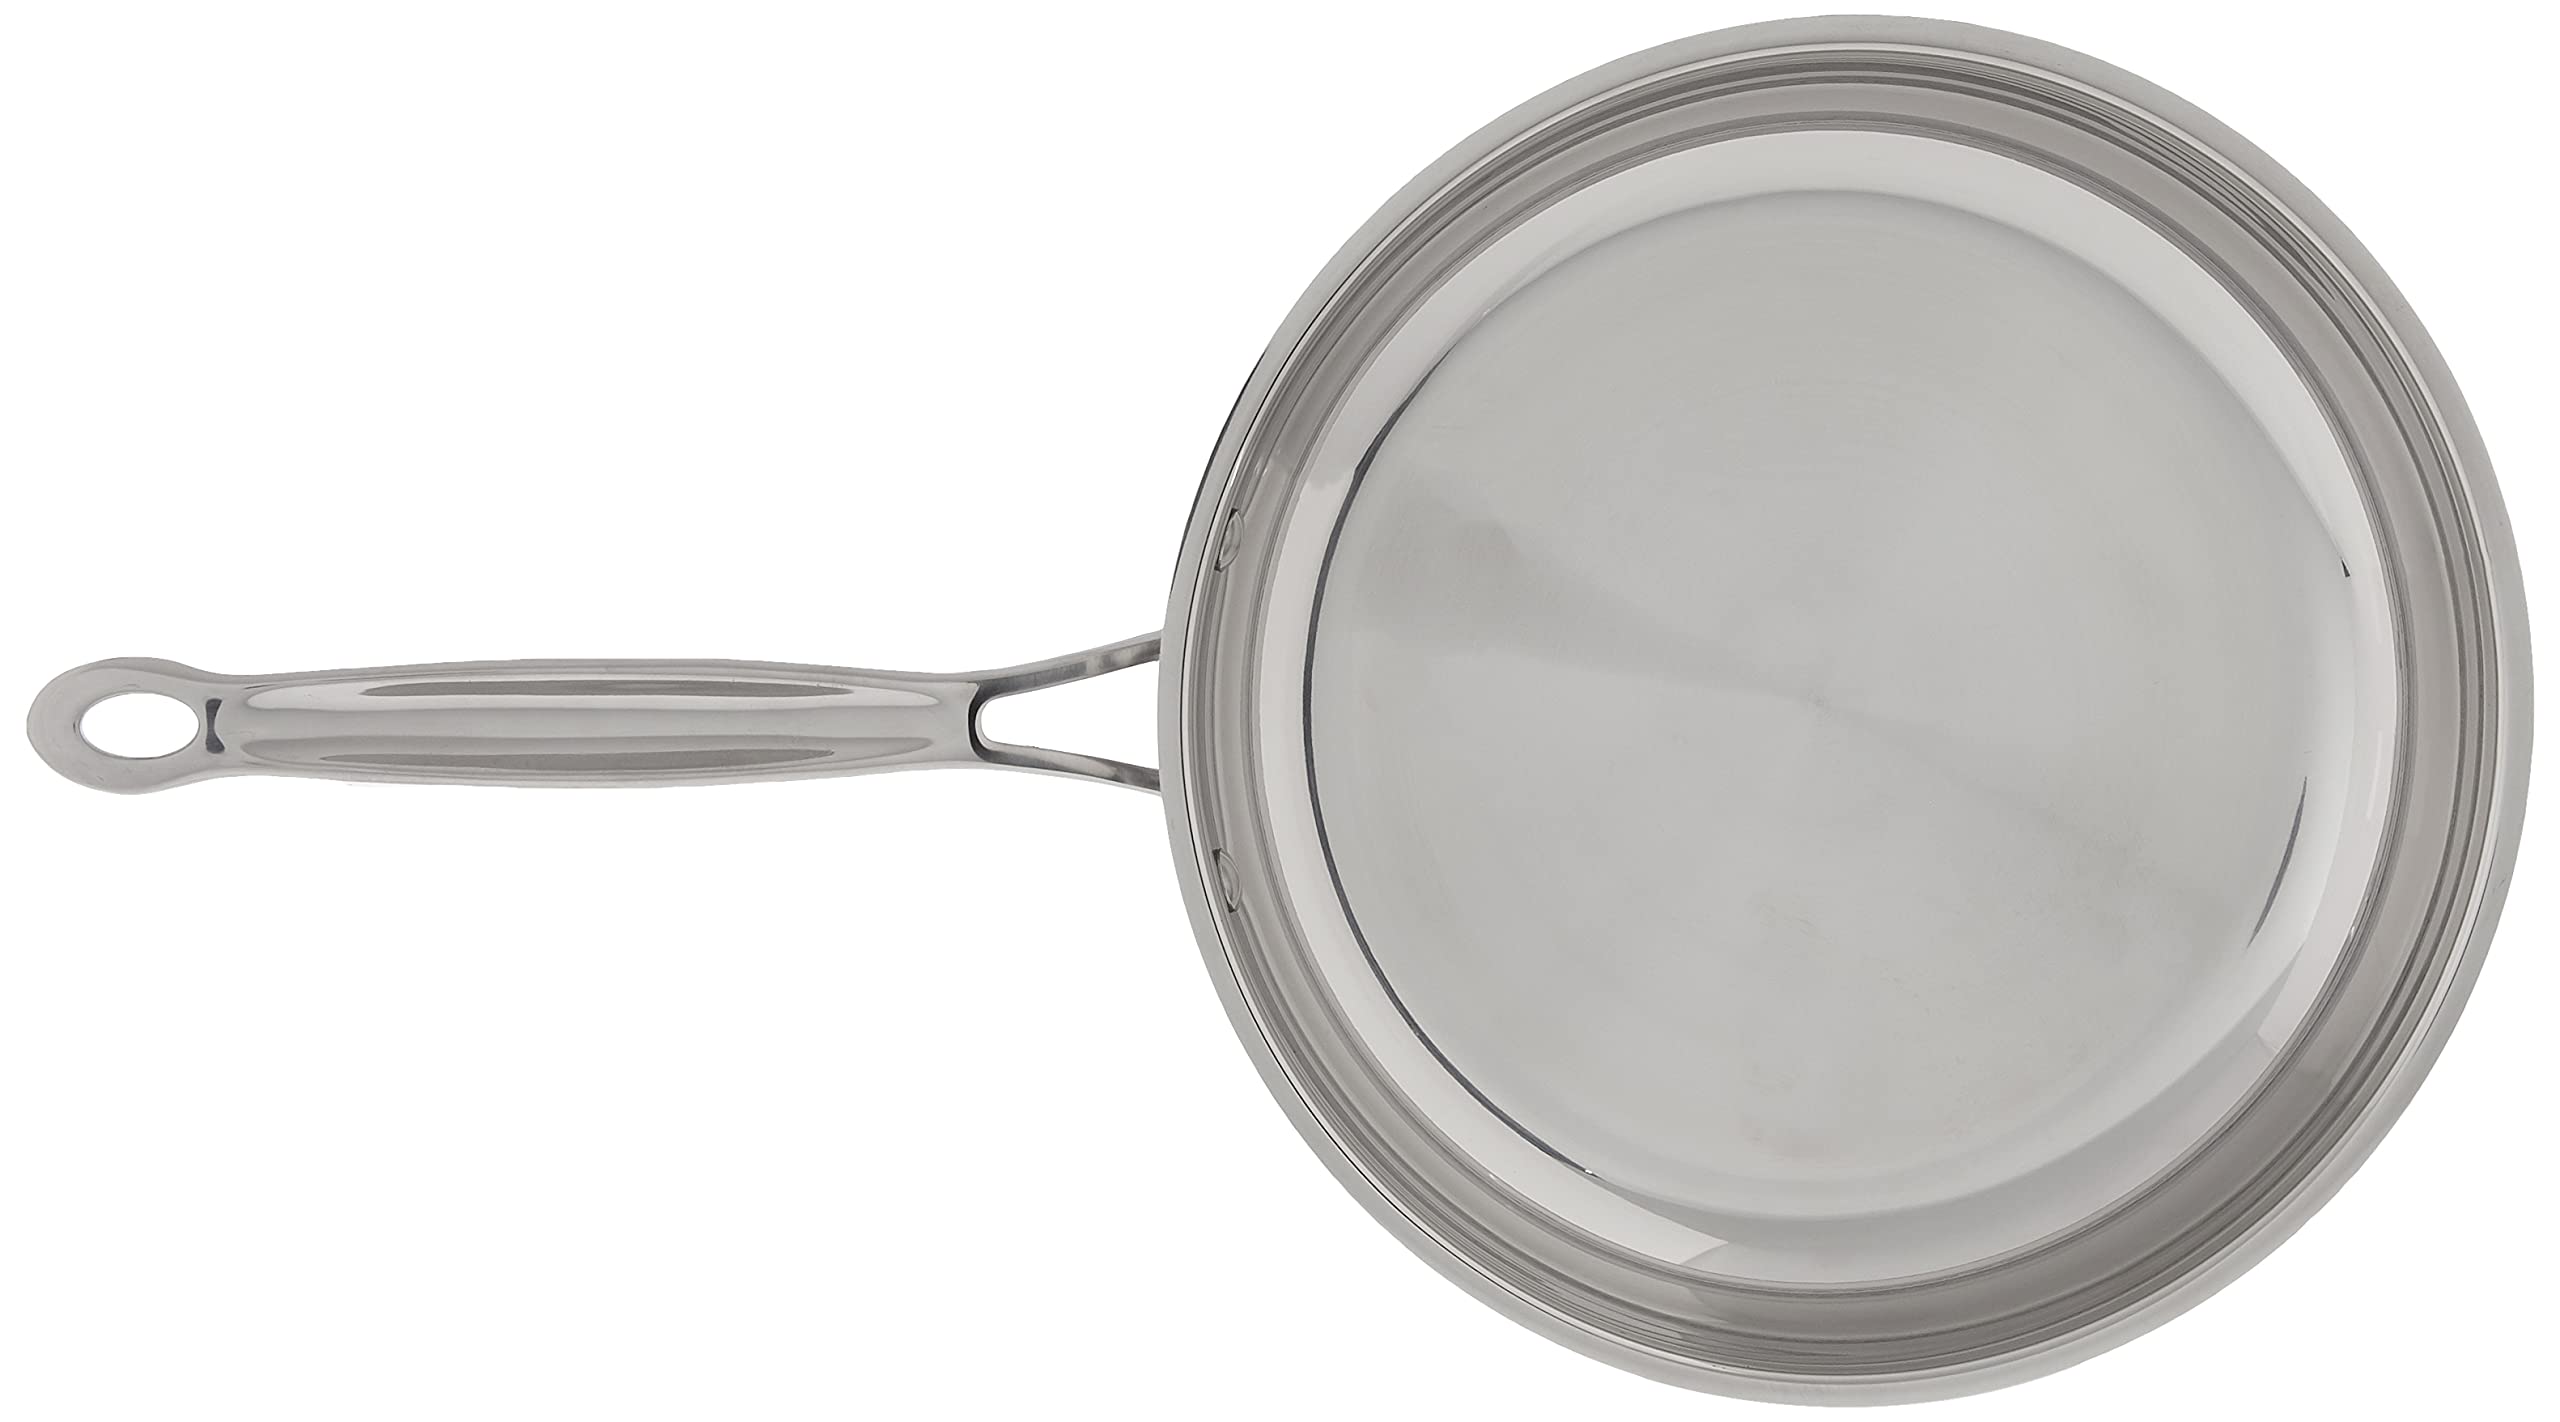 Cuisinart 722-24 10-Inch Chef's-Classic-Stainless-Cookware-Collection, Open Skillet & 7193-20 3-Quart Chef's-Classic-Stainless-Cookware-Collection, Saucepan w/Cover